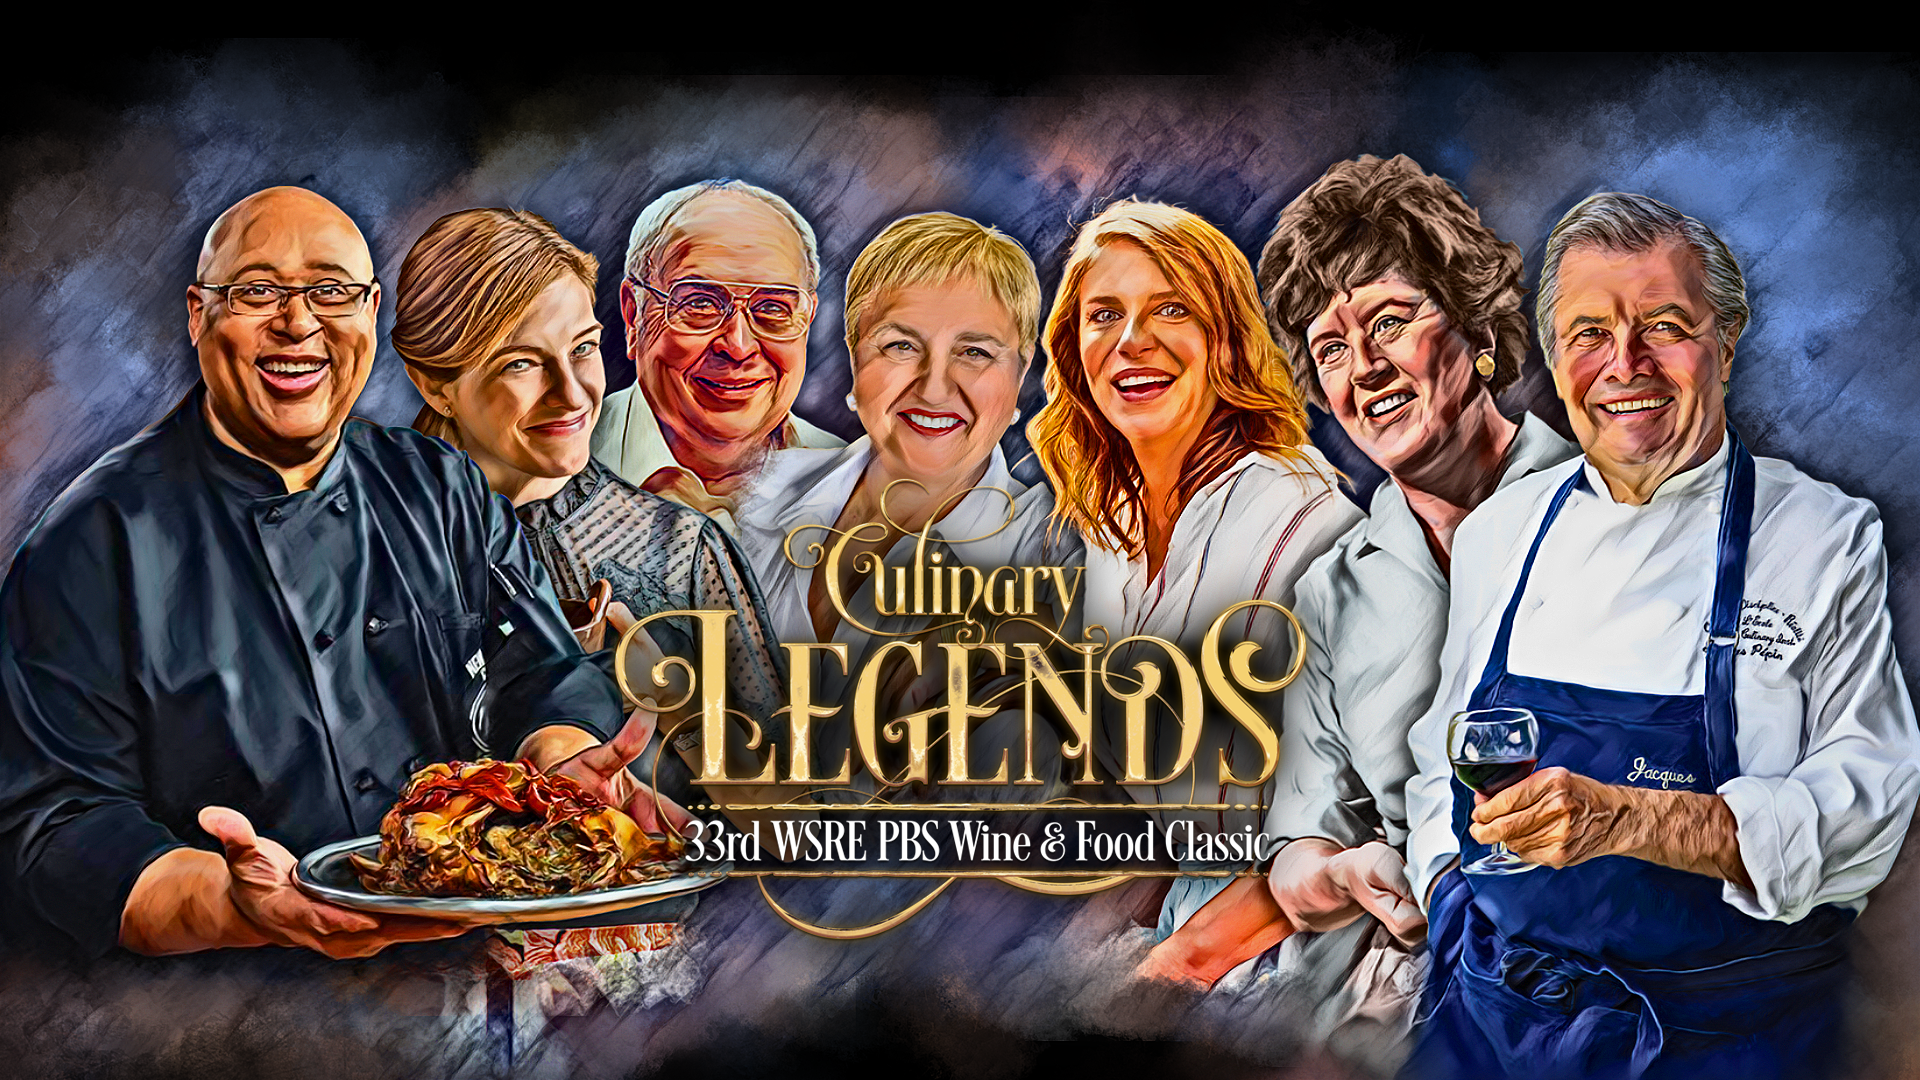 33rd WSRE PBS Wine & Food Classic Culinary Legends logo on top of 7 legendary PBS food program hosts.